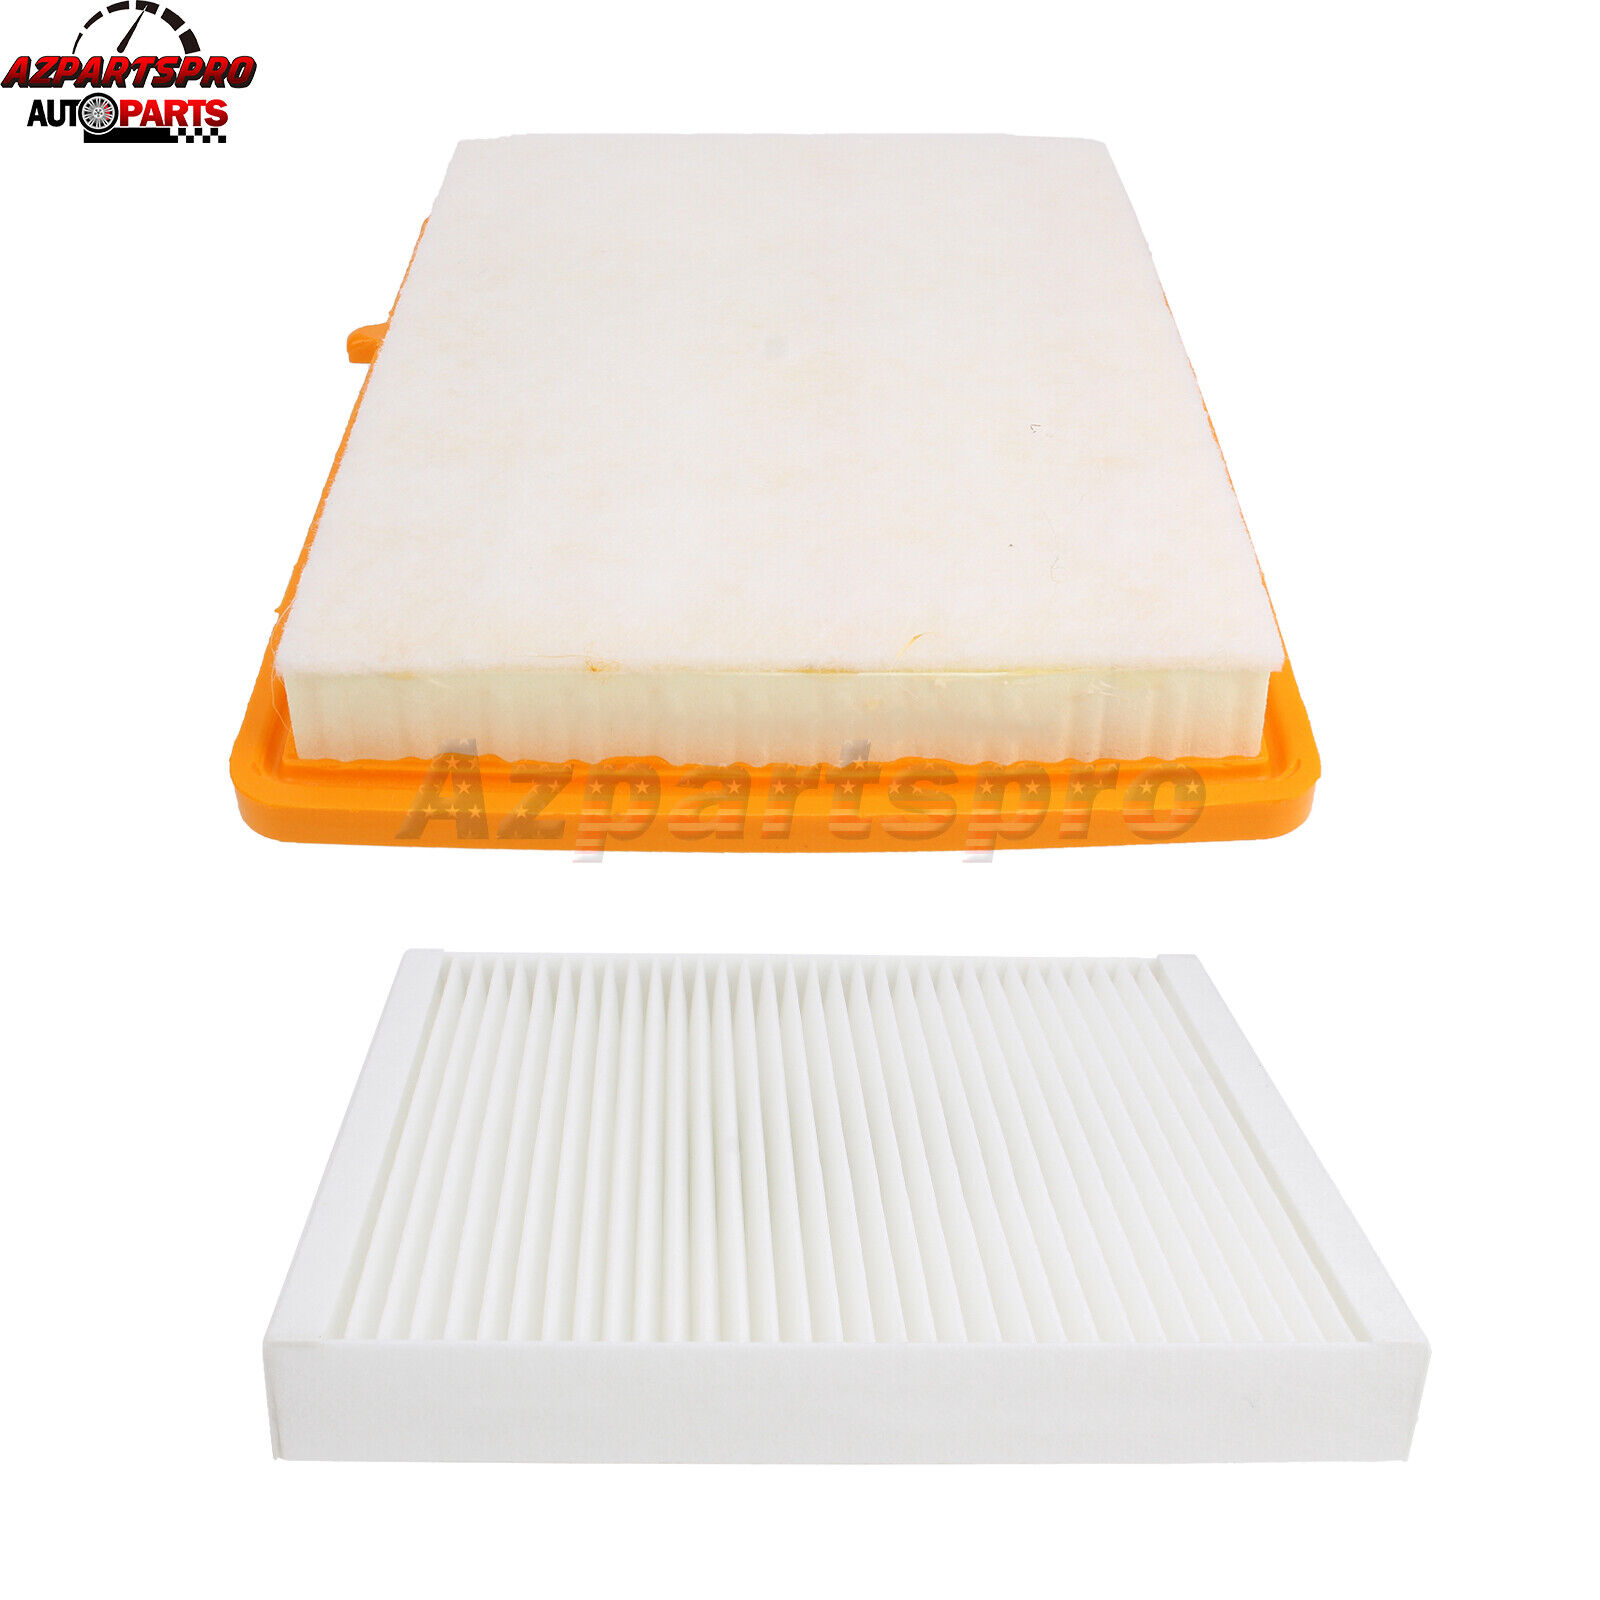 Engine & Cabin Air Filter For Chevrolet Equinox 2018 2019 2020 2021 2022 2023